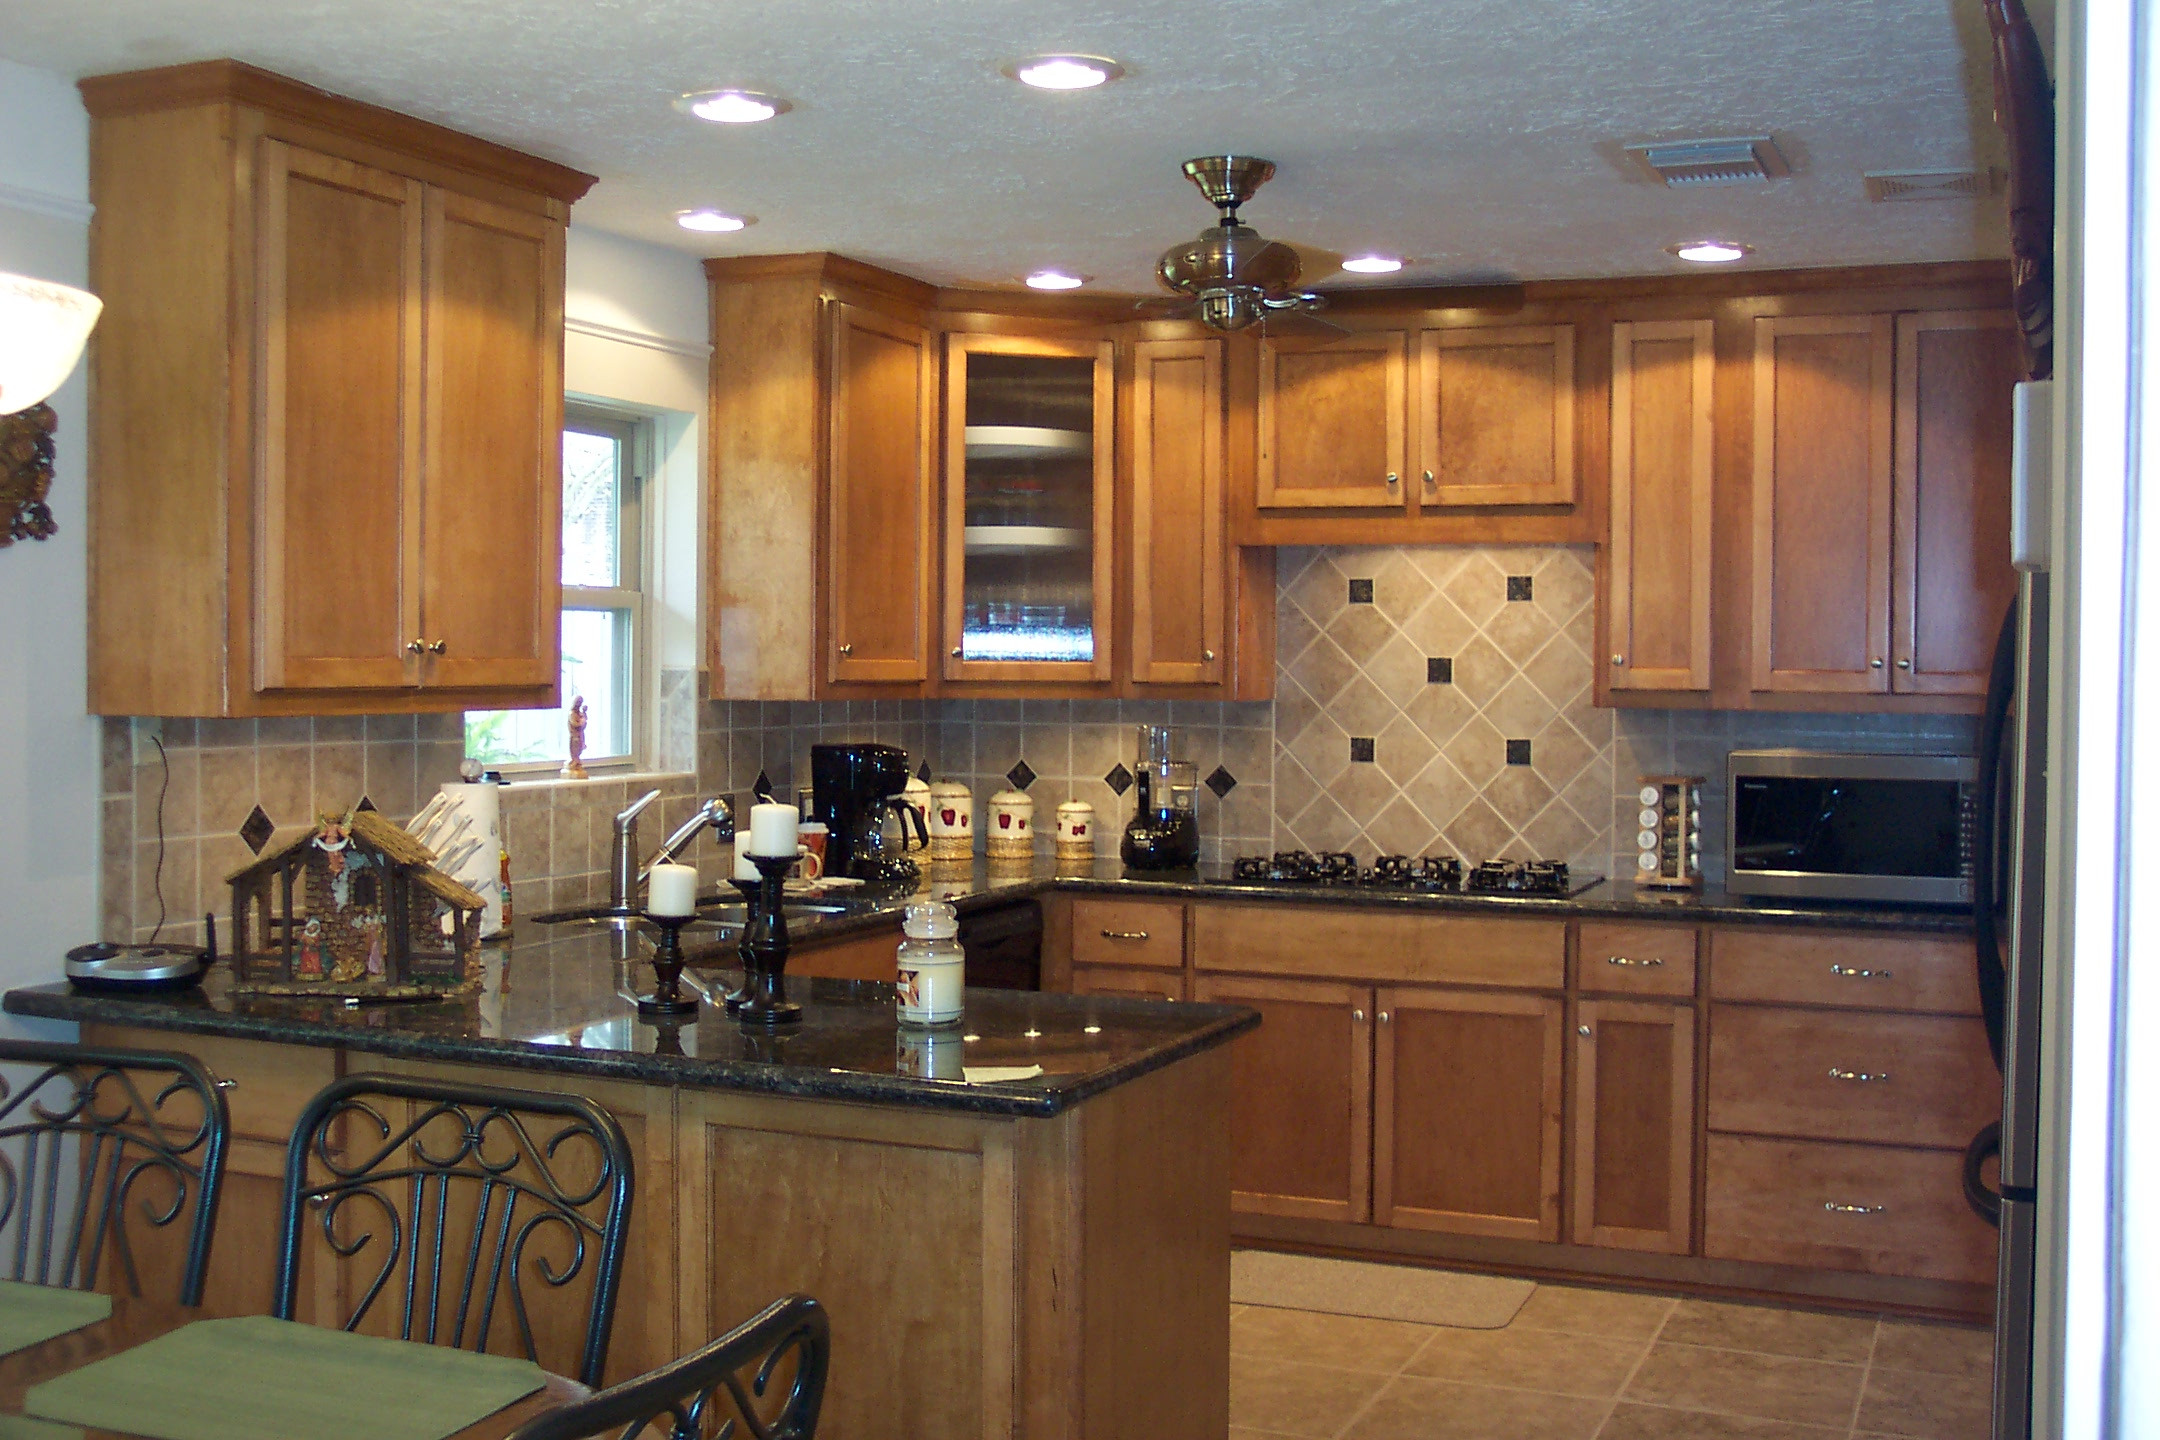 Kitchen Cabinets Remodel Ideas
 Kitchen Remodeling Ideas & s